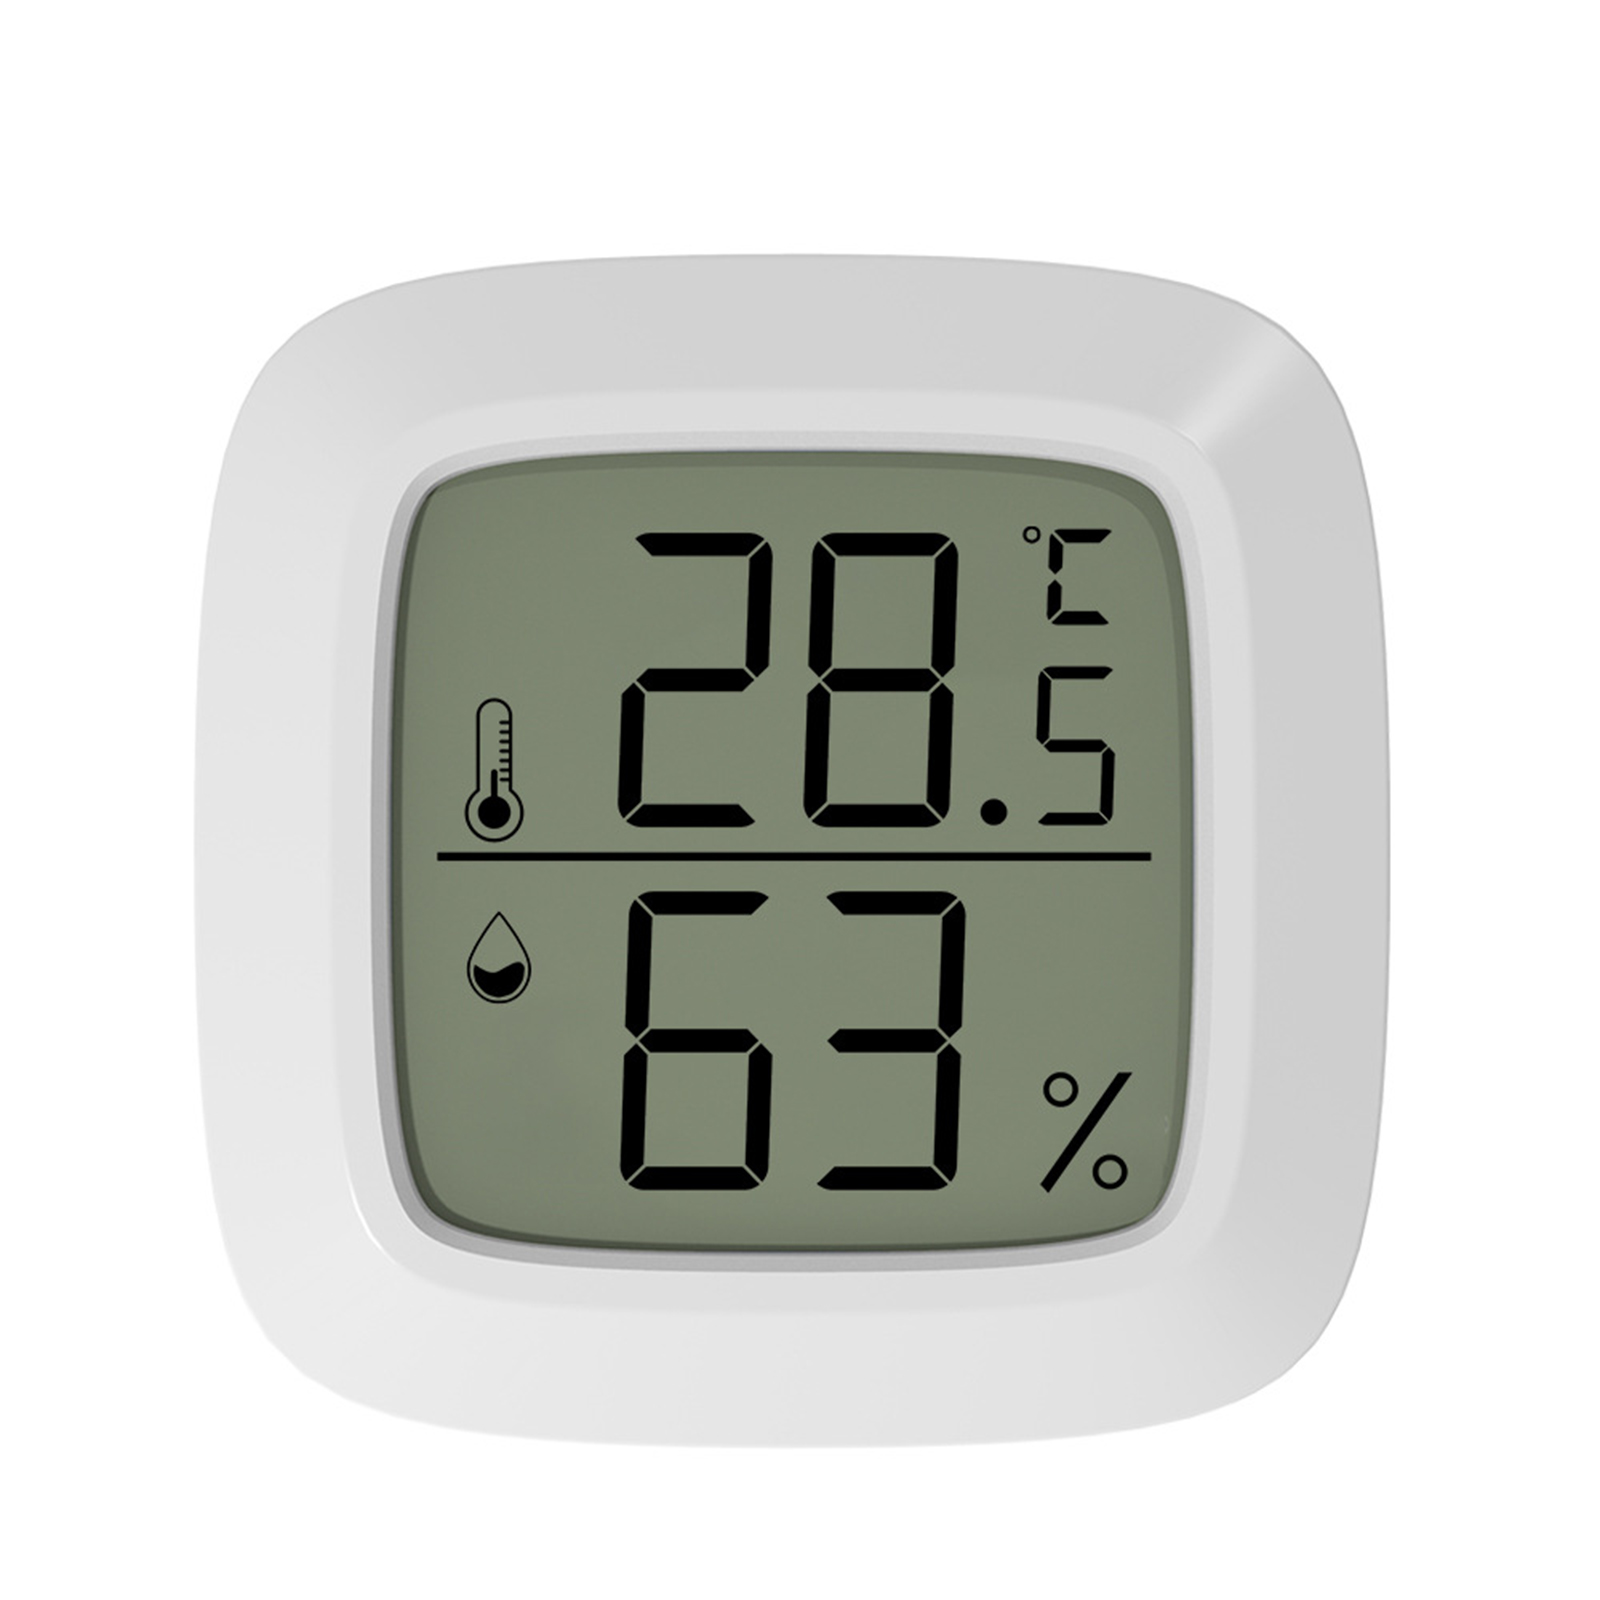 Mini Reptile Temperature Humidity Meter ± 1 ℃ ± 5% High-Accuracy Digial Display Battery Powered Thermometer Hygrometer